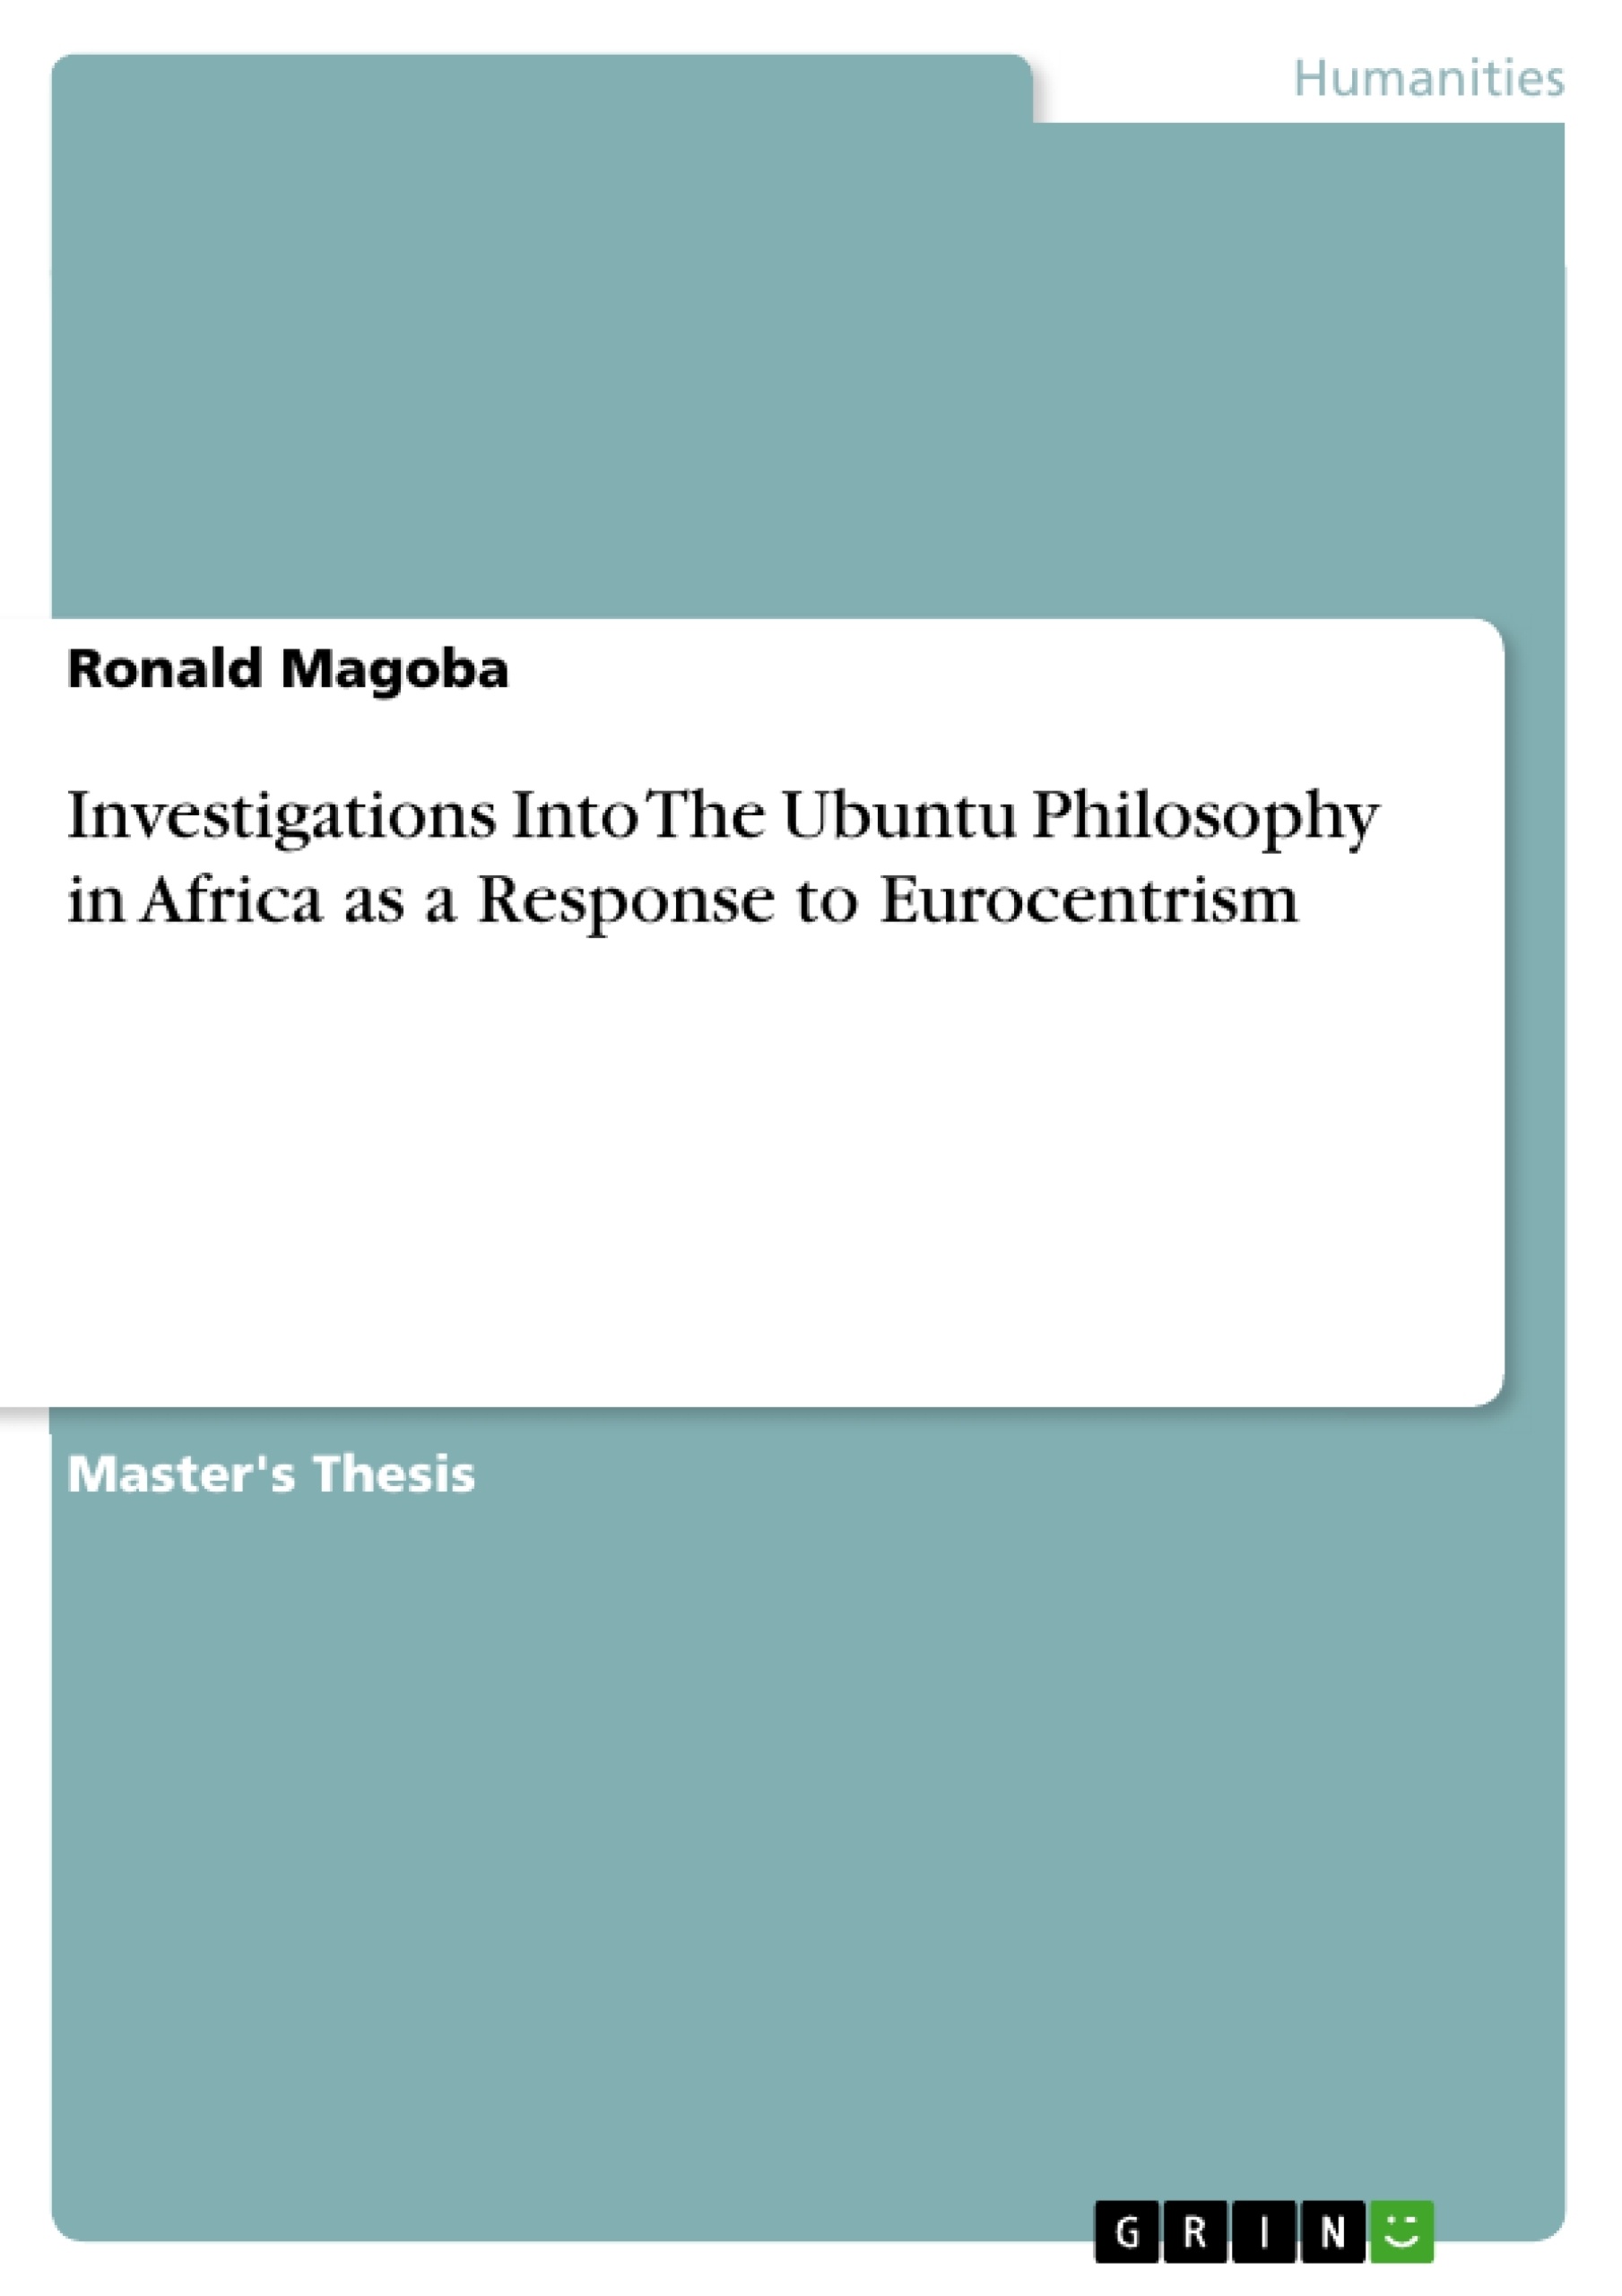 Title: Investigations Into The Ubuntu Philosophy in Africa as a Response to Eurocentrism